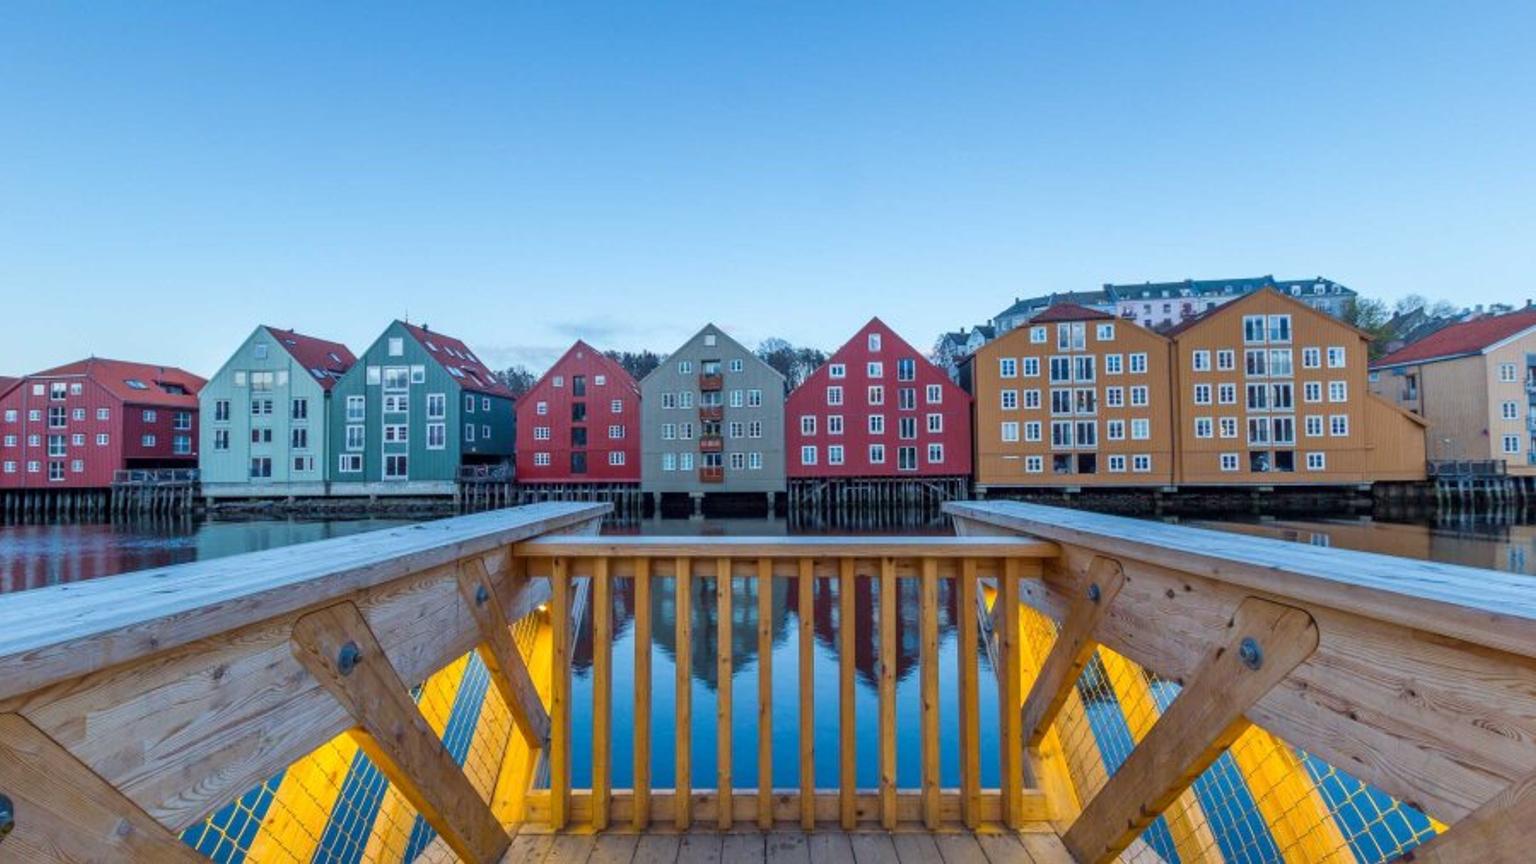 Pier in Trondheim. Multiple wooden buildings lined up